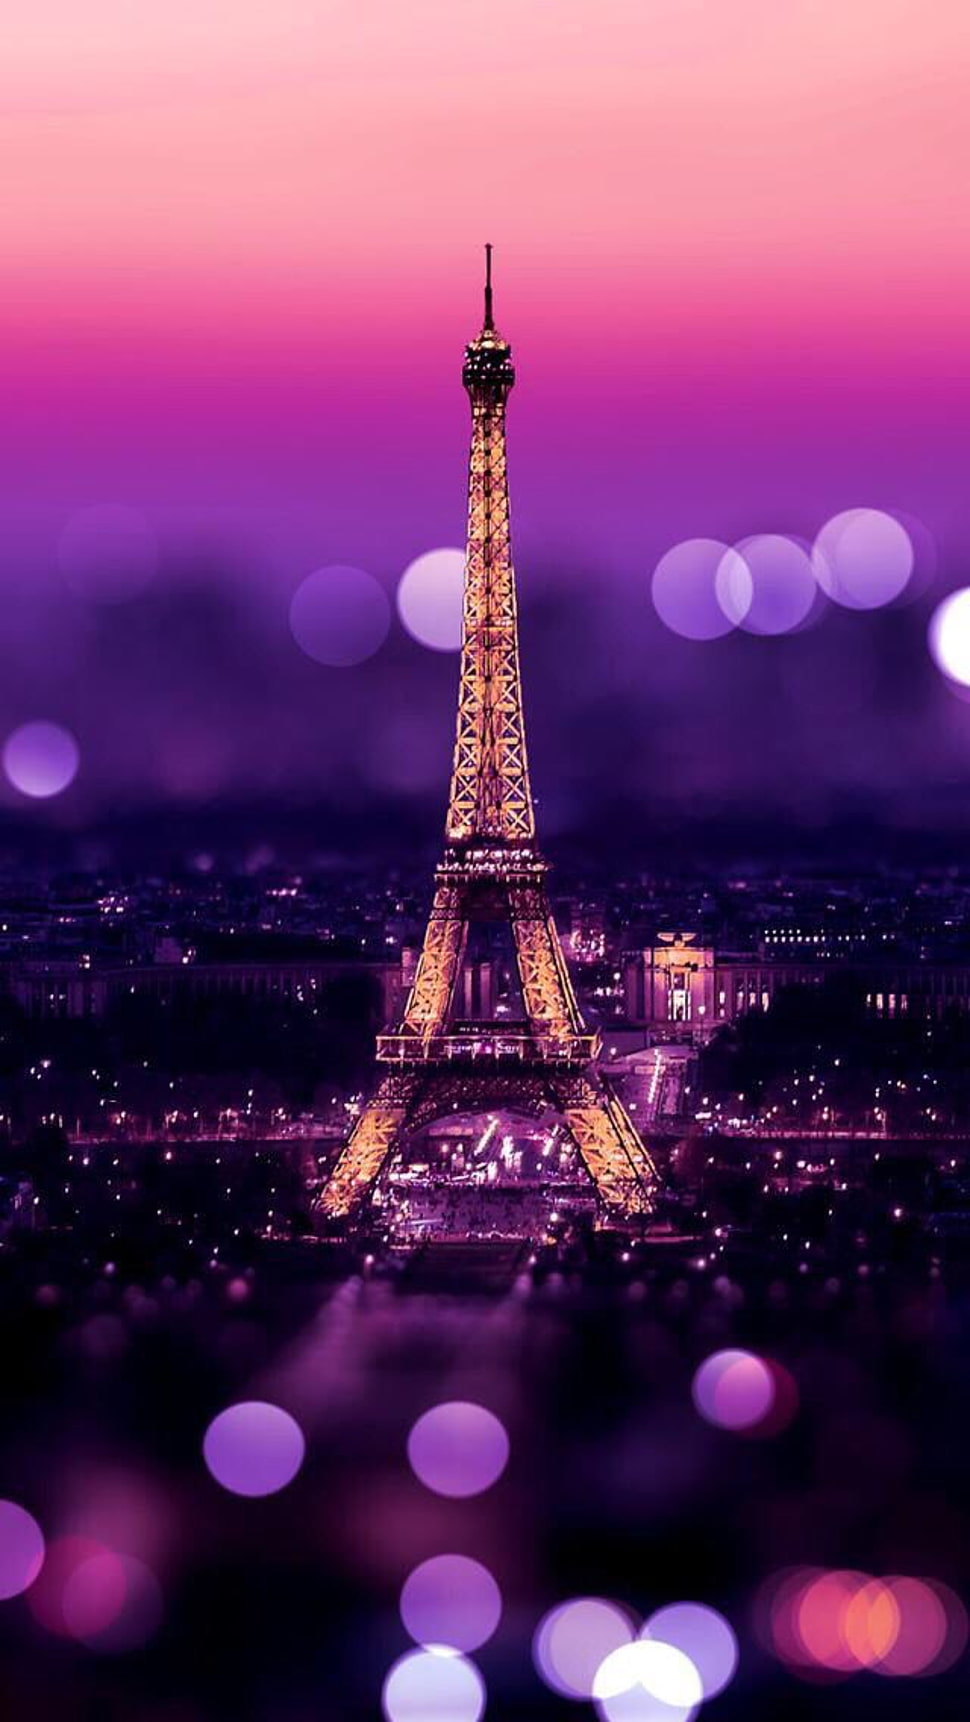 Eiffel Tower during night time HD wallpaper